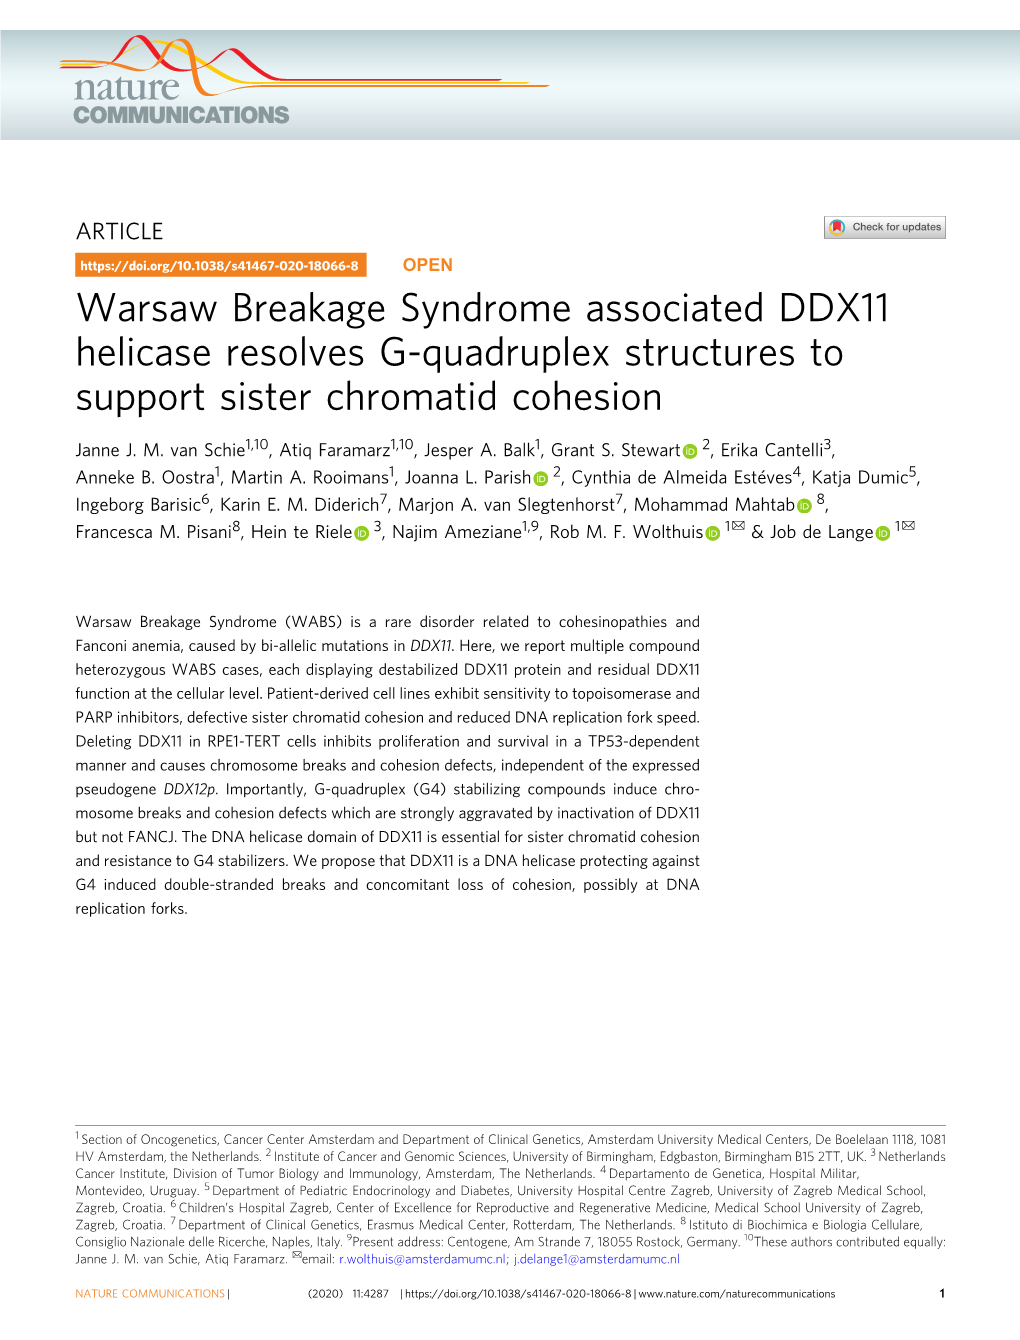 Warsaw Breakage Syndrome Associated DDX11 Helicase Resolves G-Quadruplex Structures to Support Sister Chromatid Cohesion